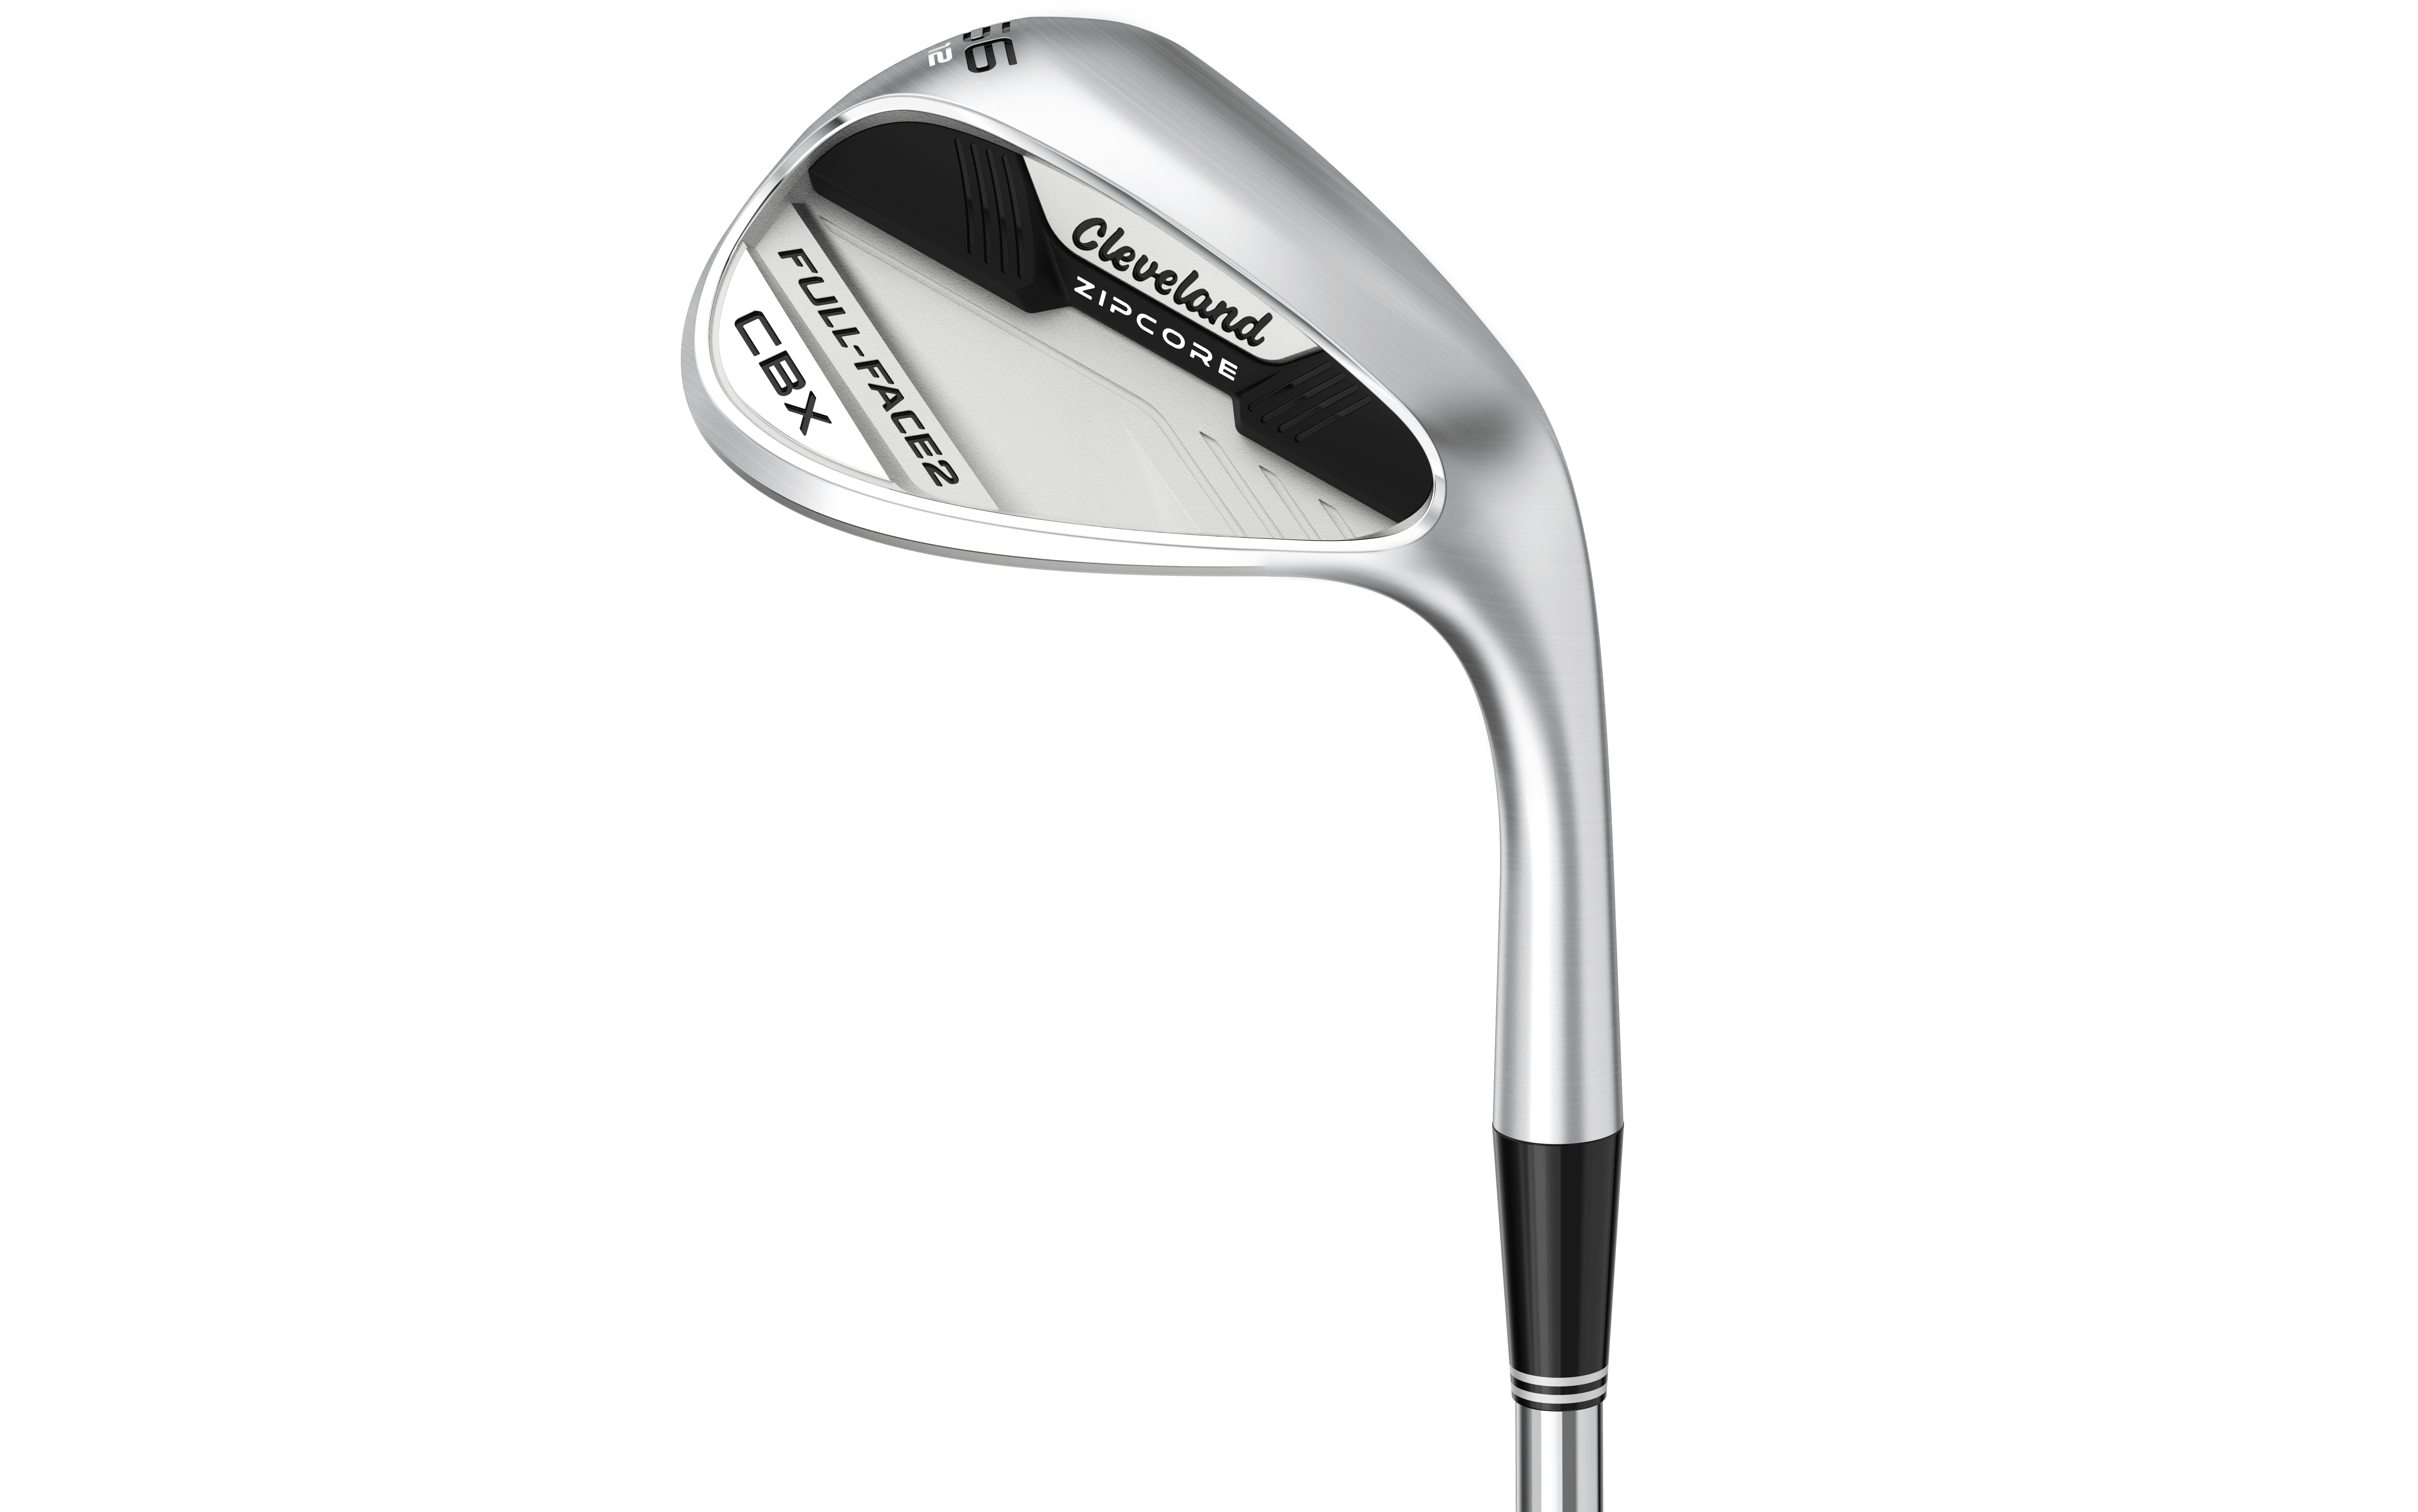 Cleveland CBX Full Face 2 Tour Satin Wedge · Left handed · Graphite · Wedge · 60°